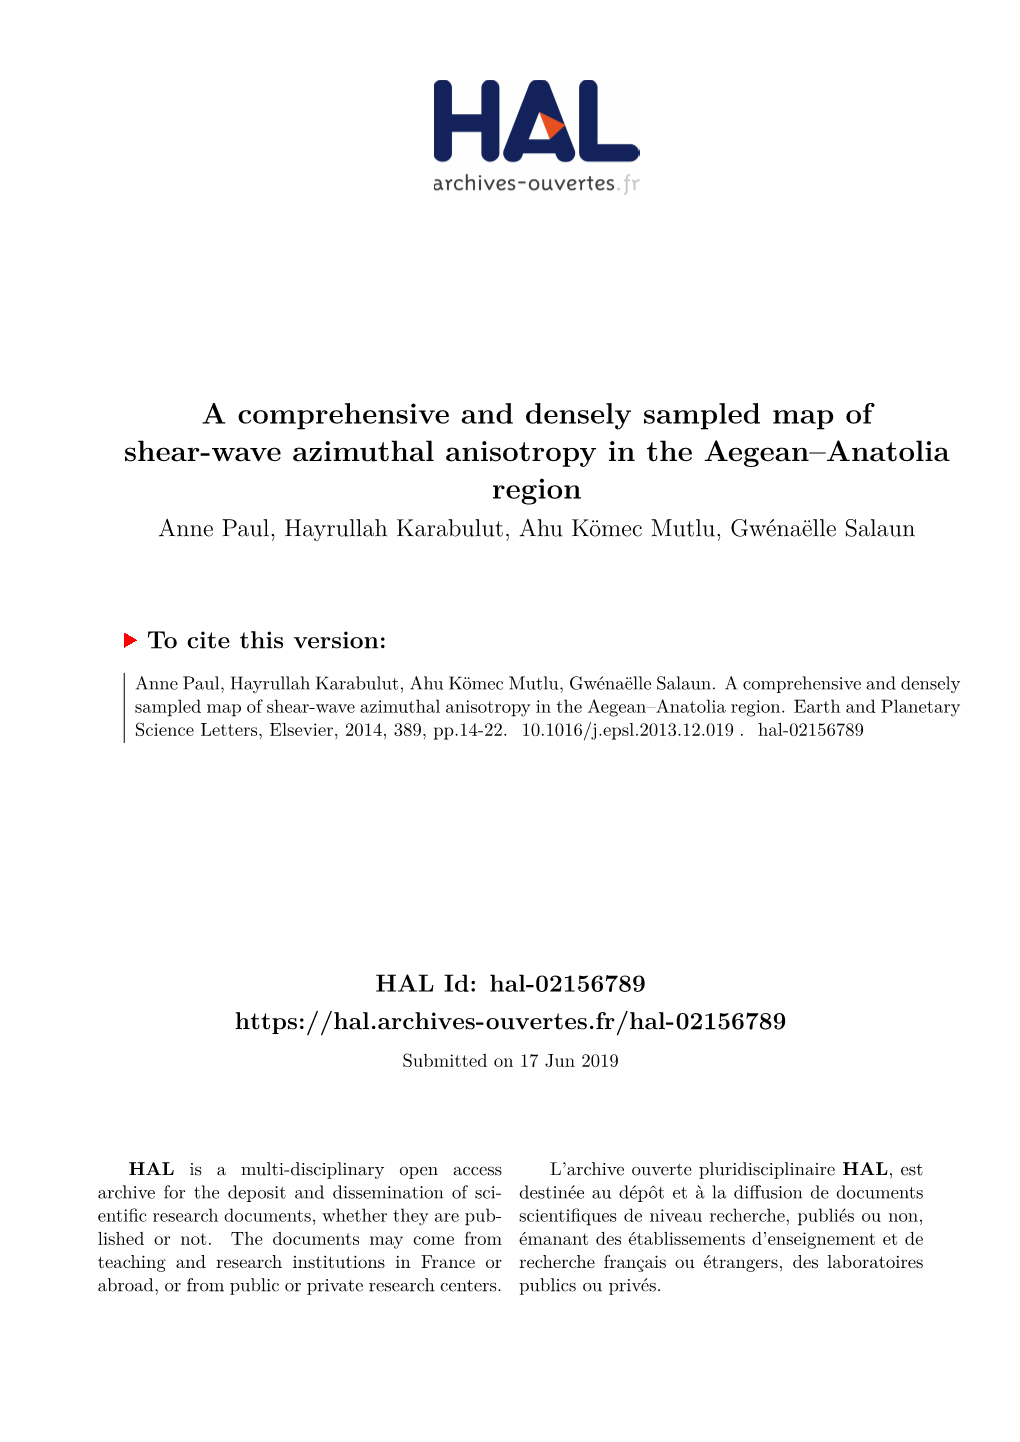 A Comprehensive and Densely Sampled Map of Shear-Wave